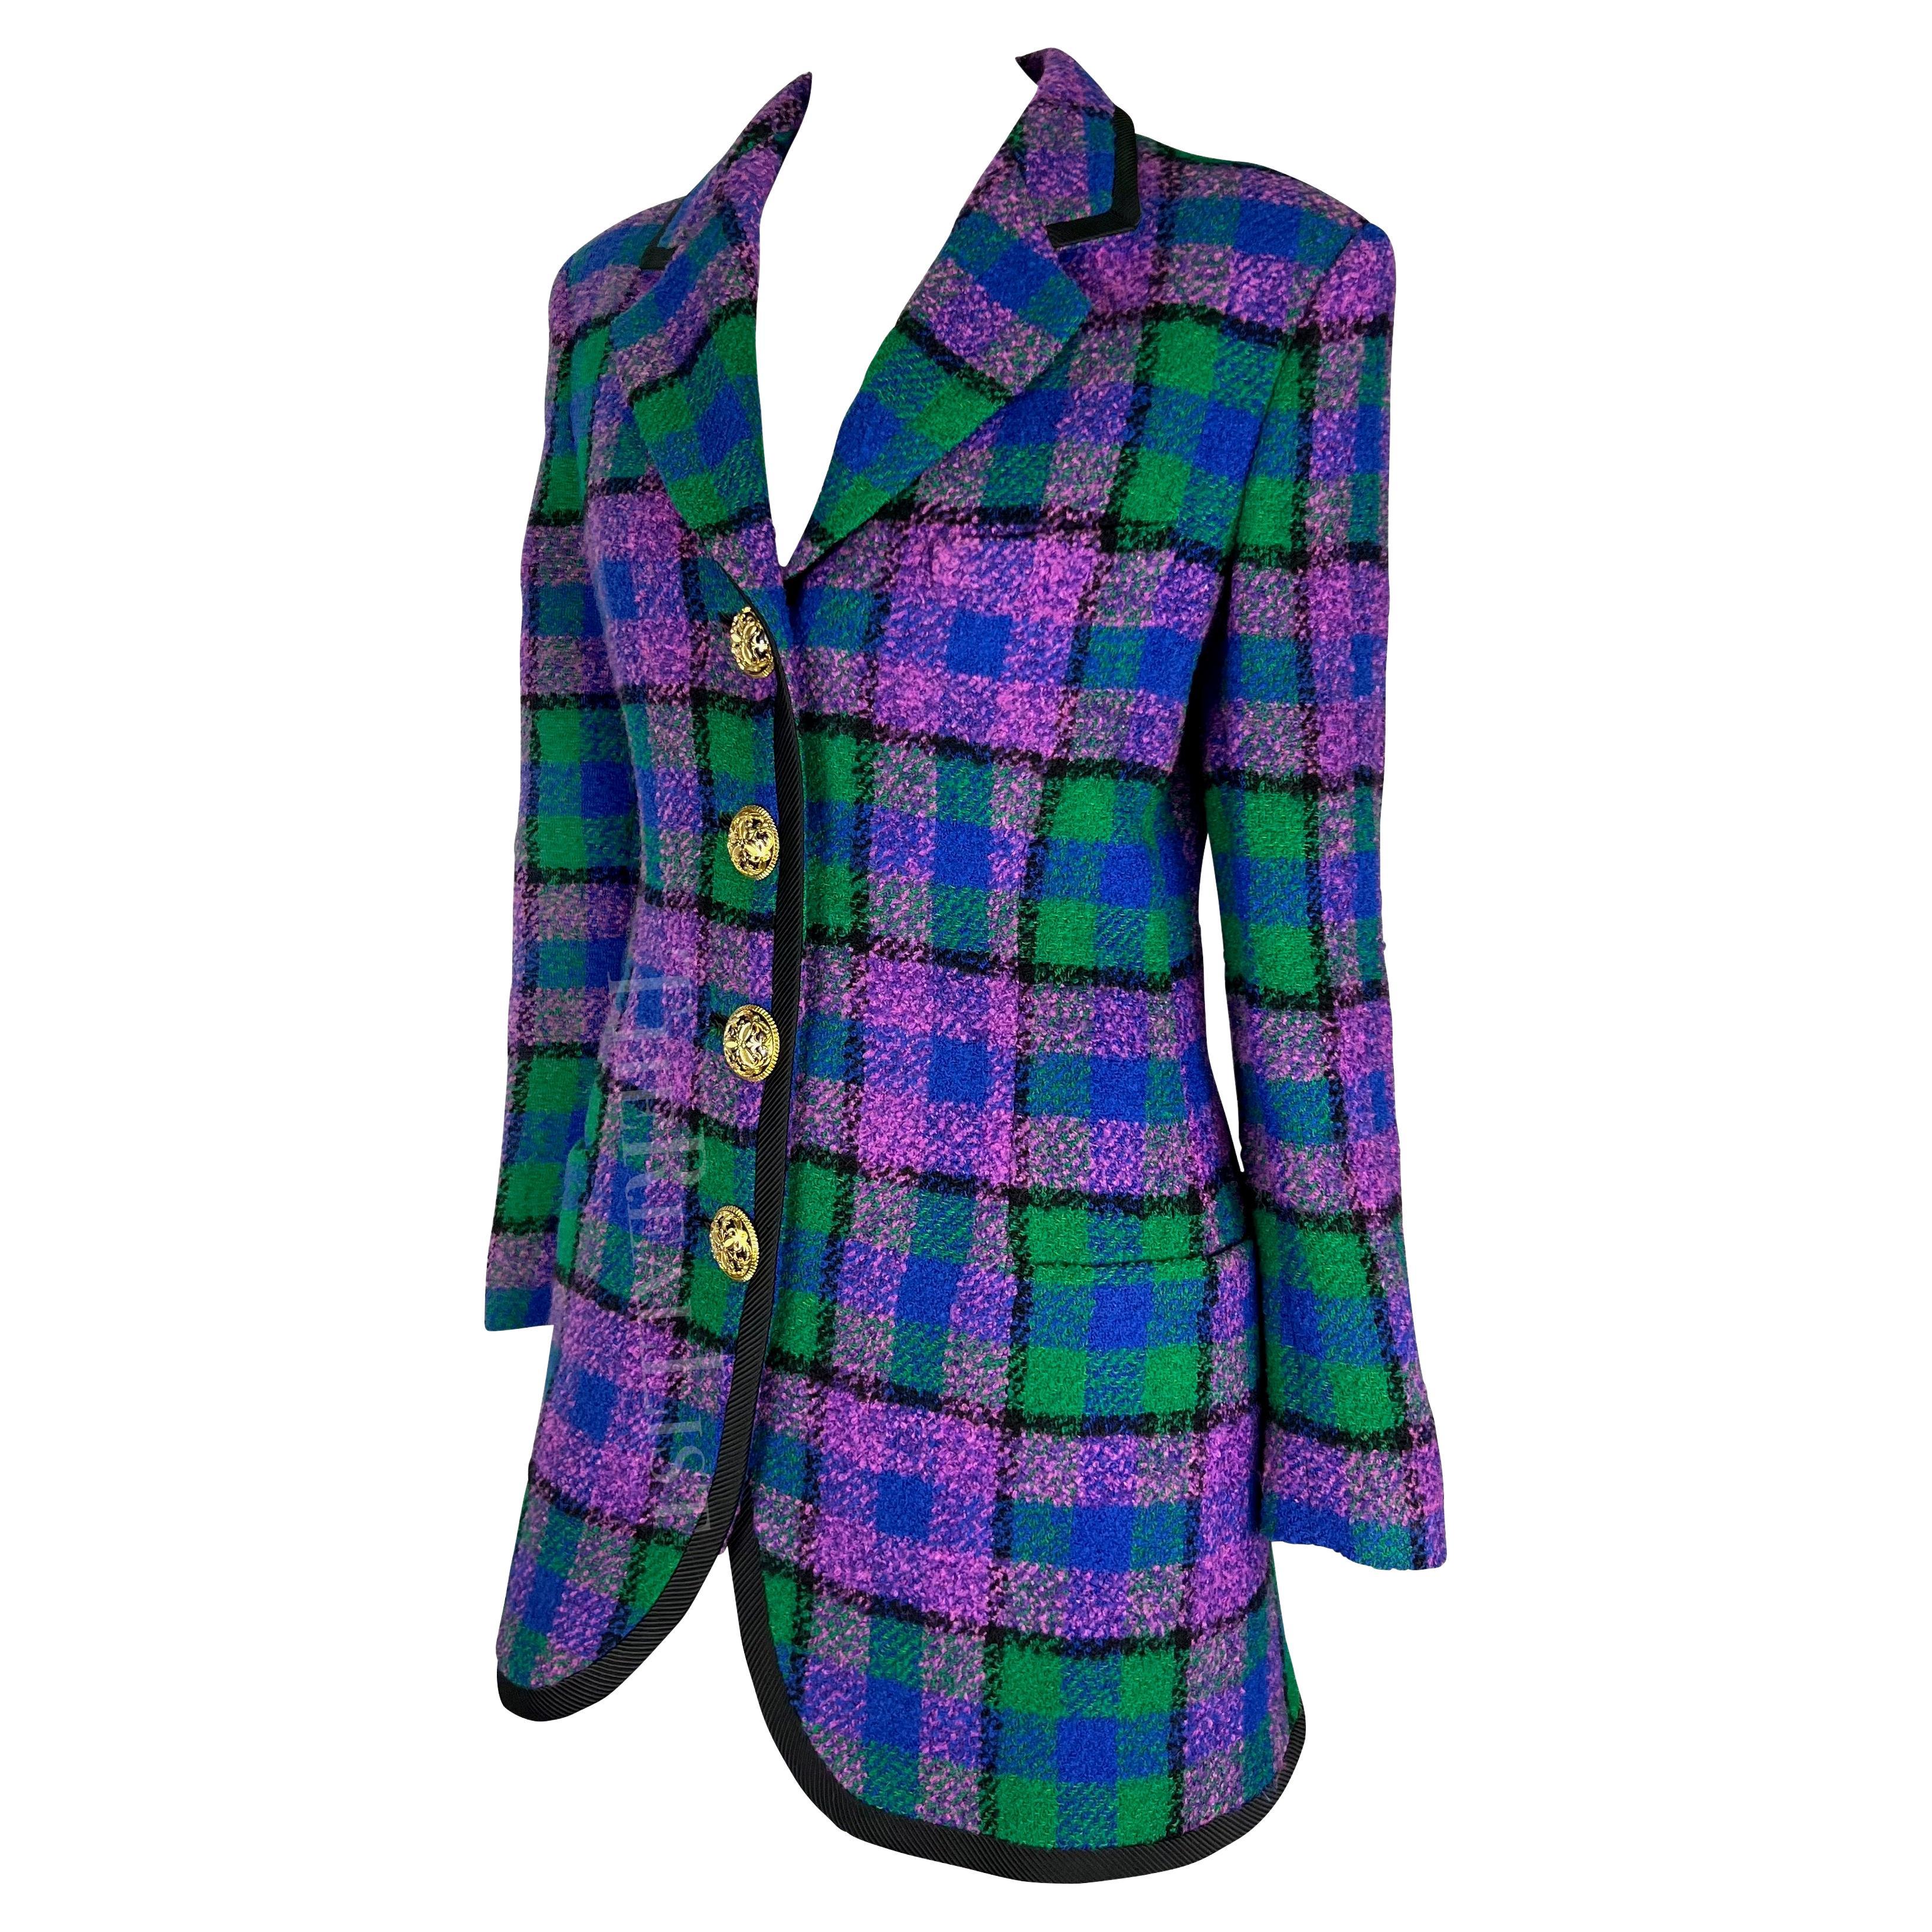 F/W 1991 Gianni Versace Purple Green Plaid Tweed Blazer Runway Mini Dress In Excellent Condition For Sale In West Hollywood, CA